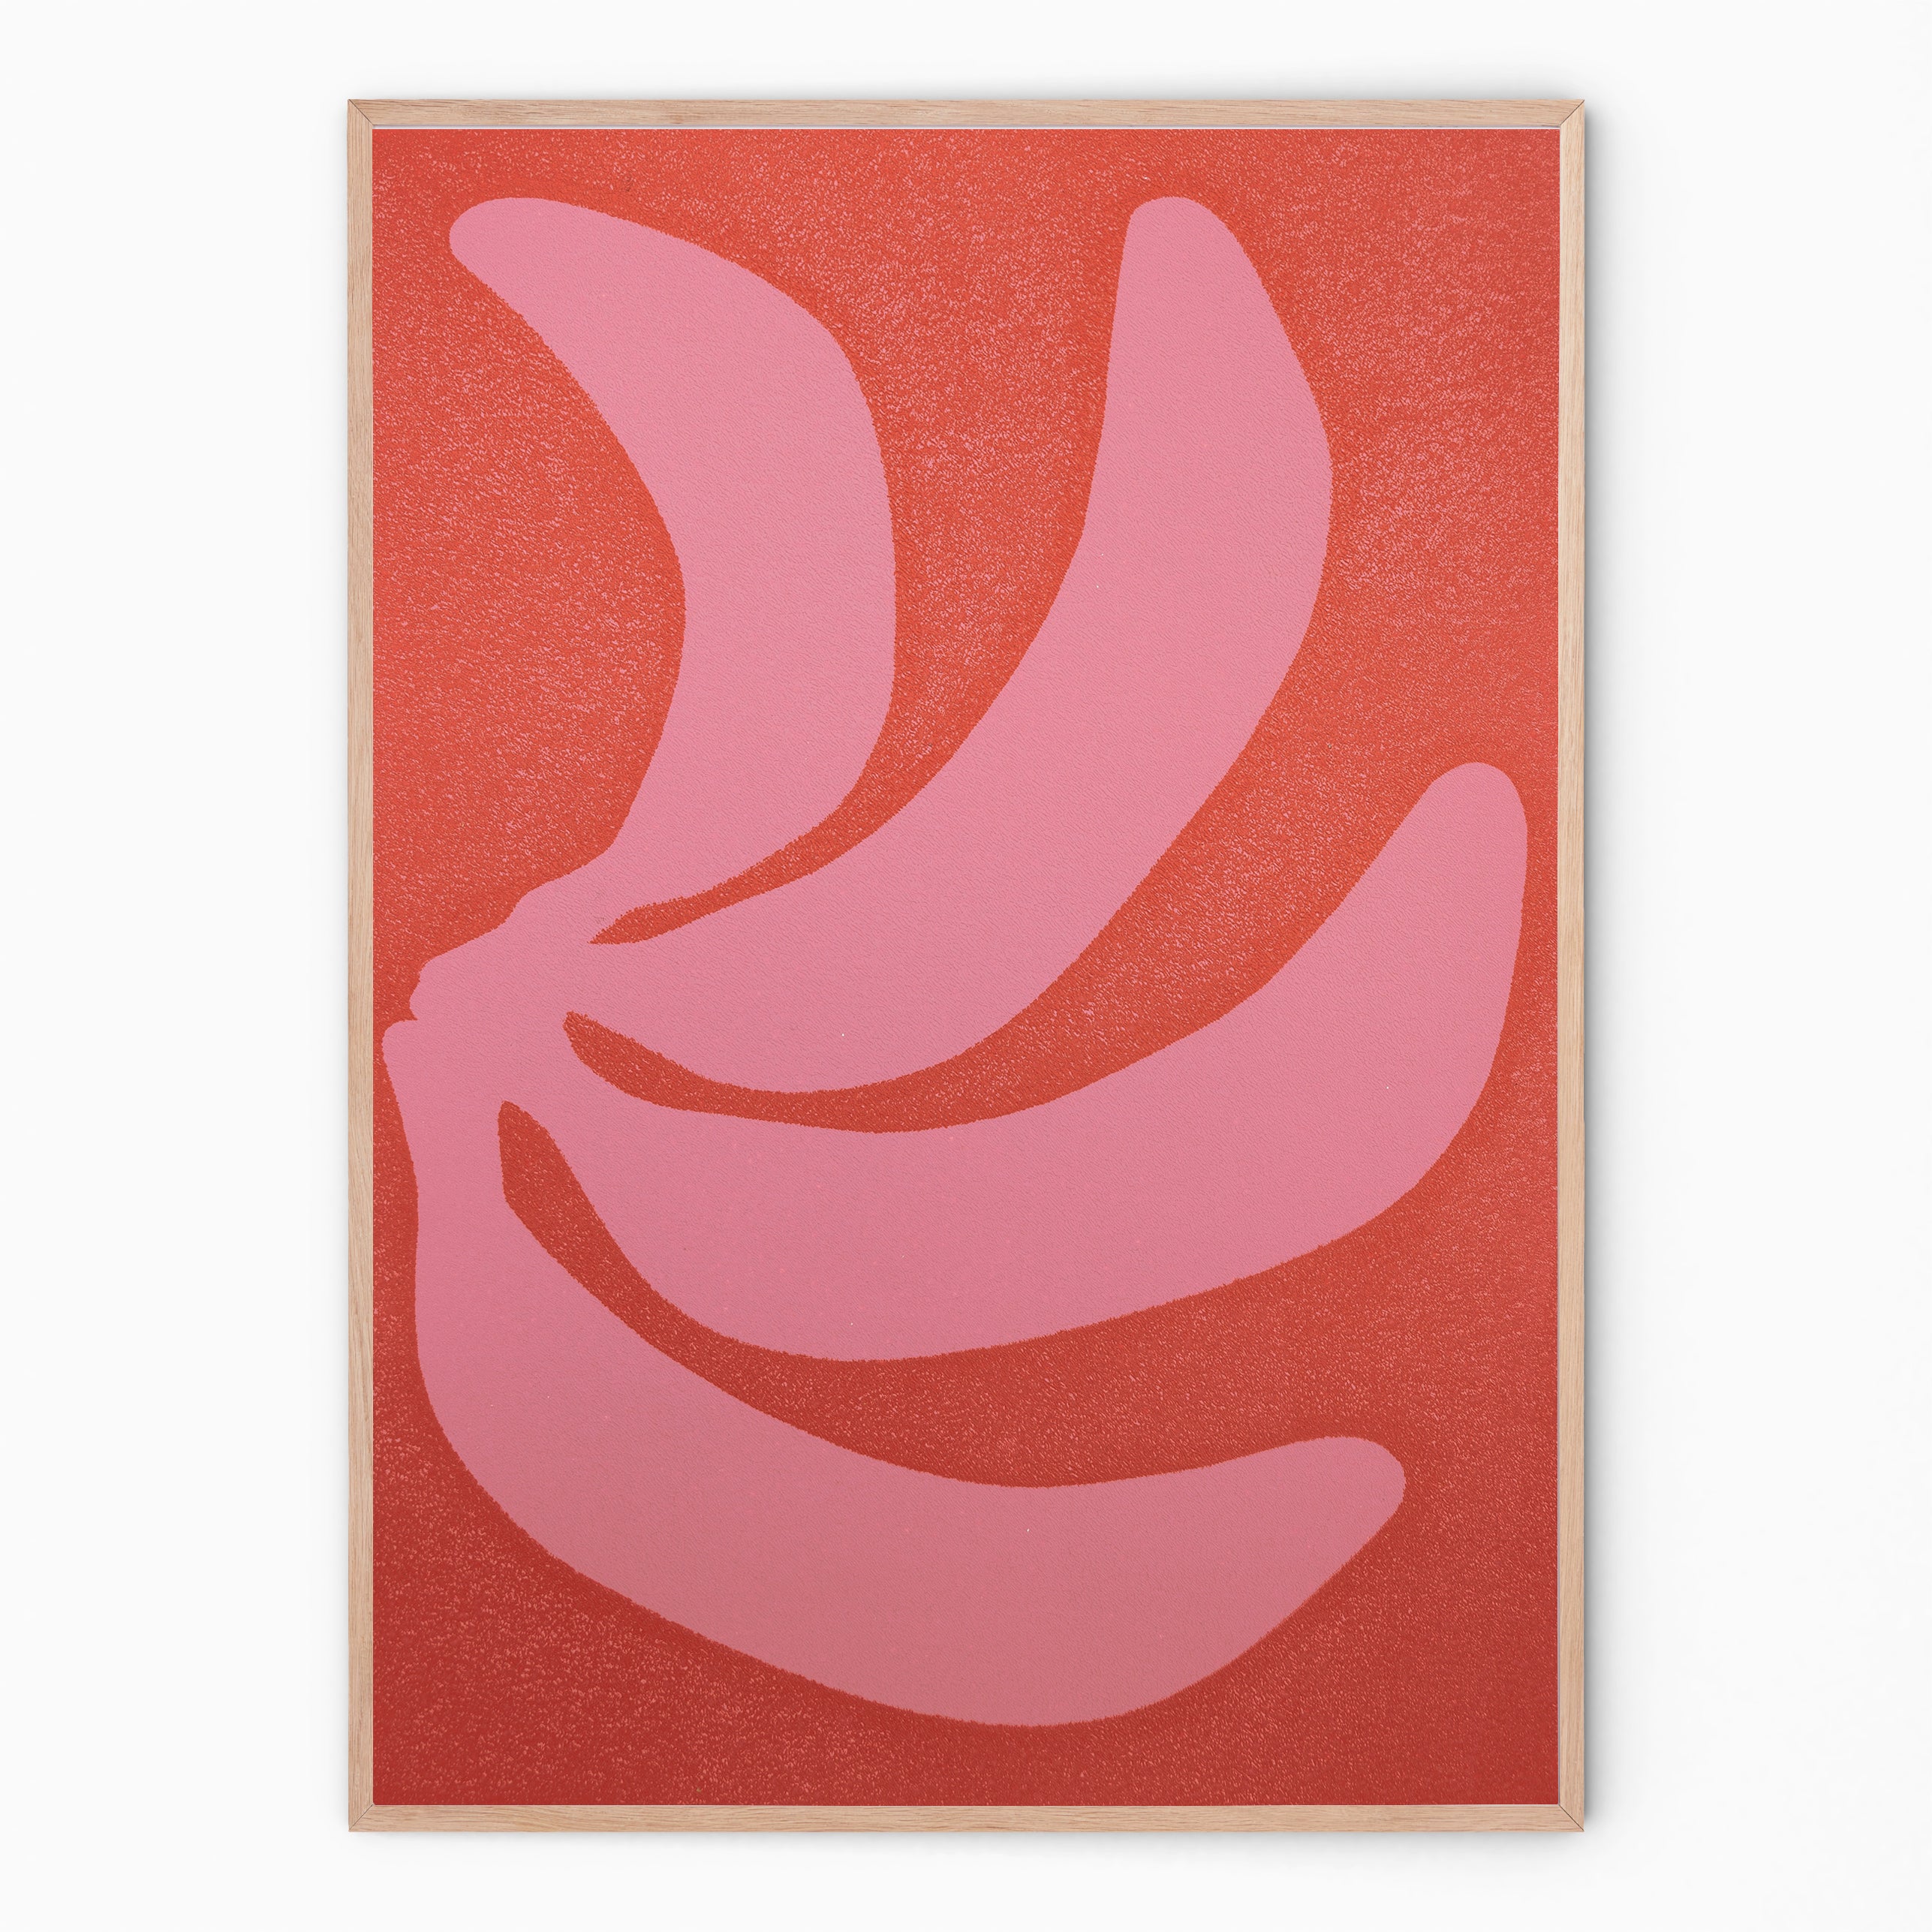 Colorful wall art in red and soft pink I Handmade poster Enkel Art Studio